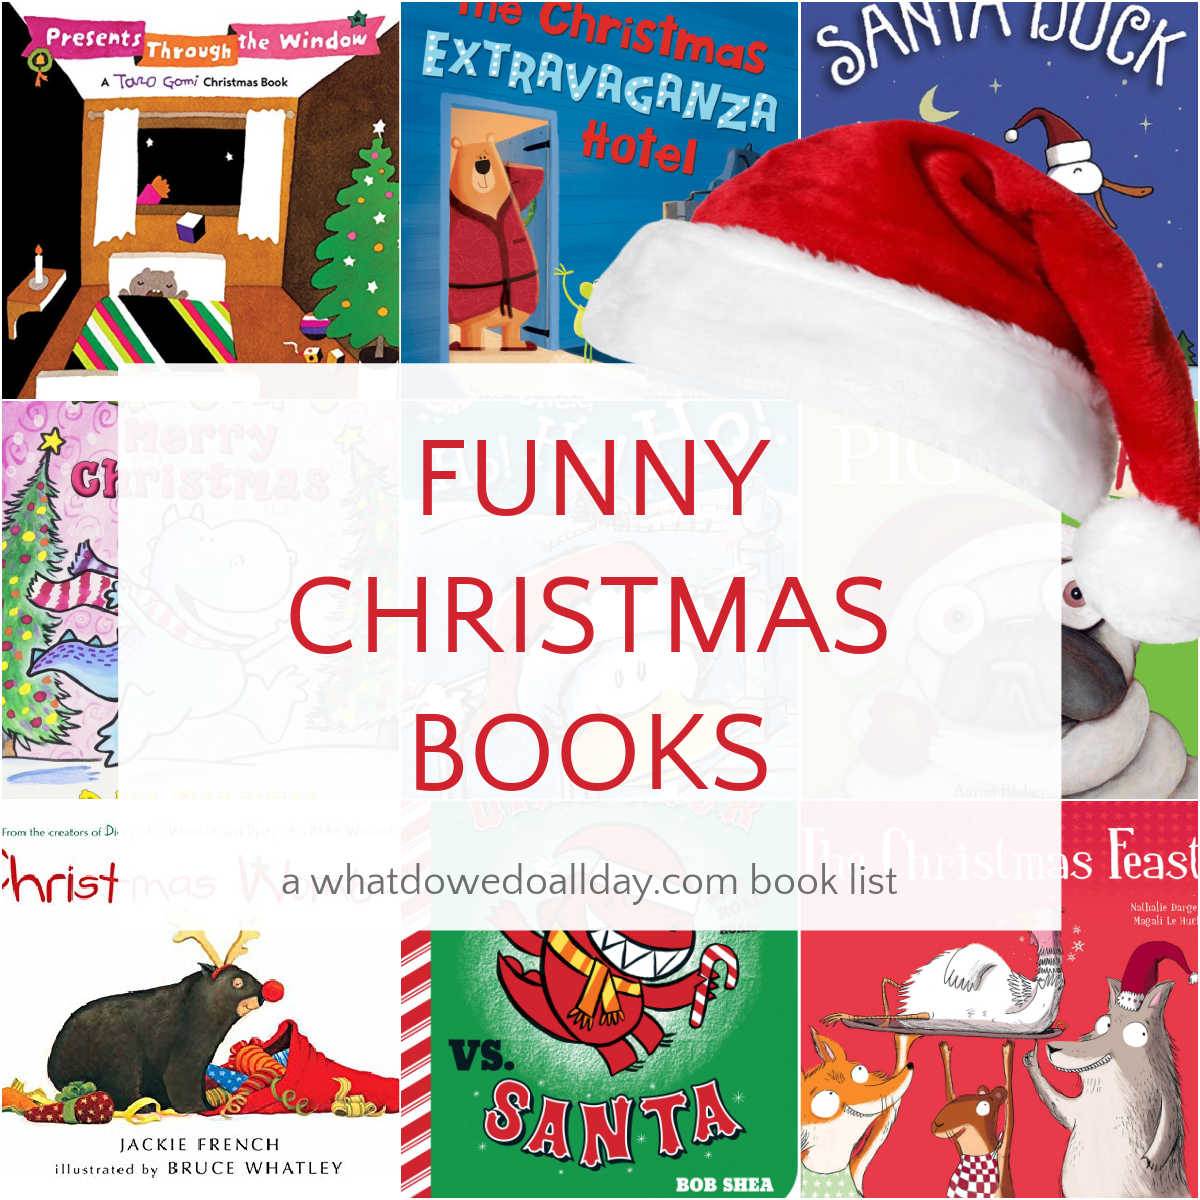 Funny christmas books collage of book covers